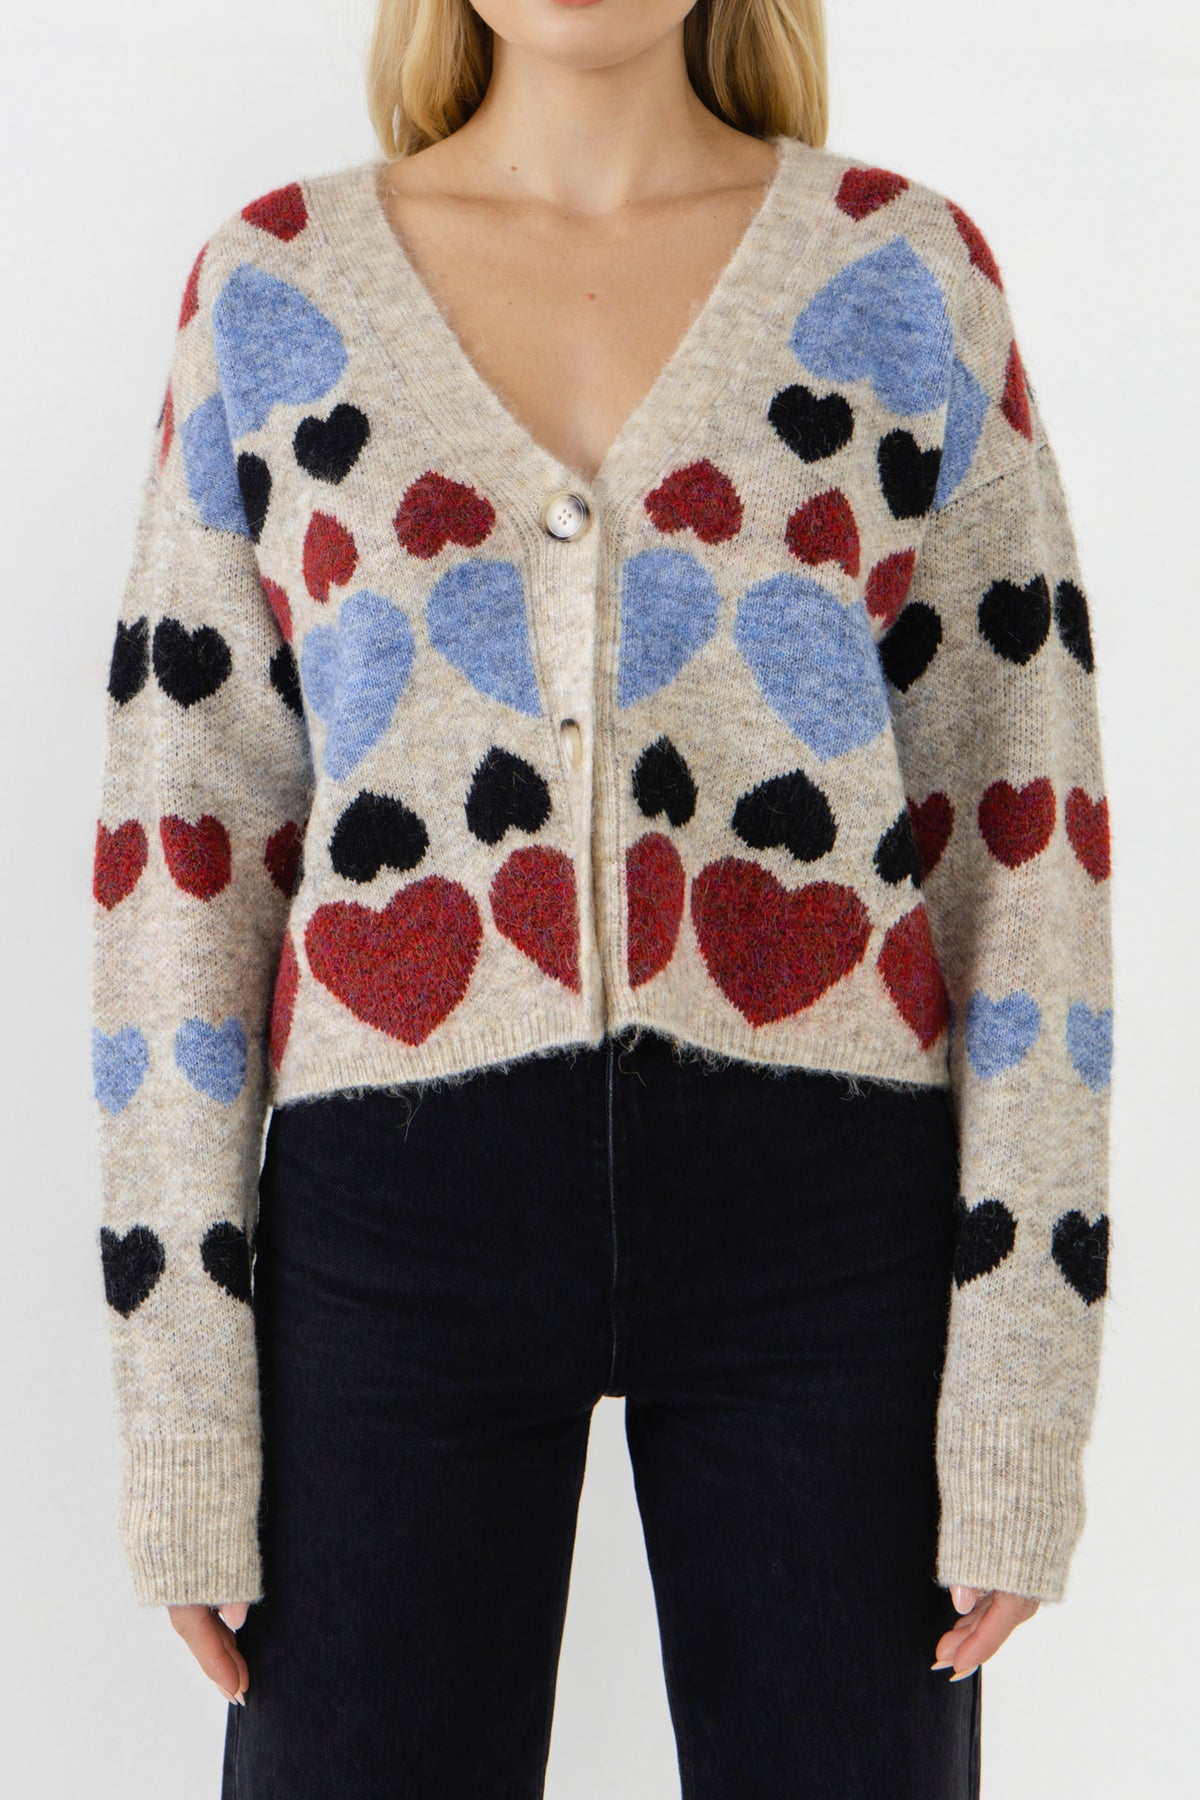 FREE THE ROSES - Heart Cardigan - SWEATERS & KNITS available at Objectrare